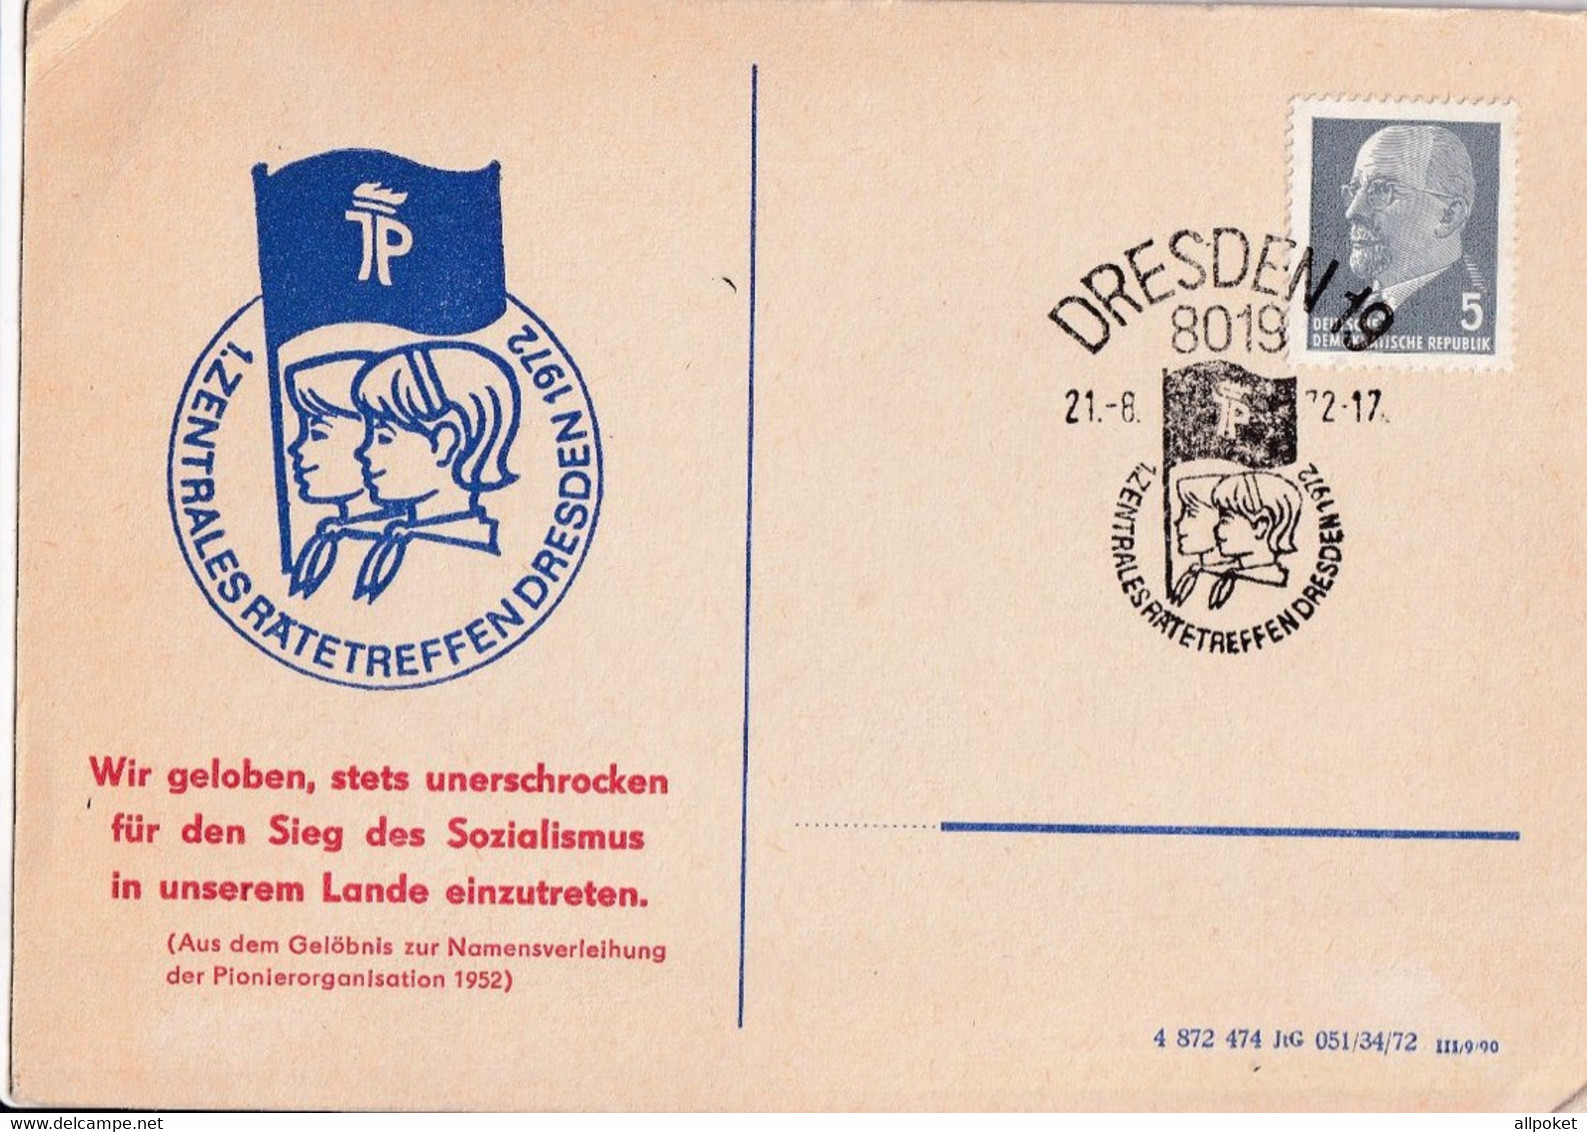 A14402 - ZENTRALES RATTETREFFEND DRESDEN IP SCOUTS DRESDEN GERMANY 1972 - Cartoline Private - Usati